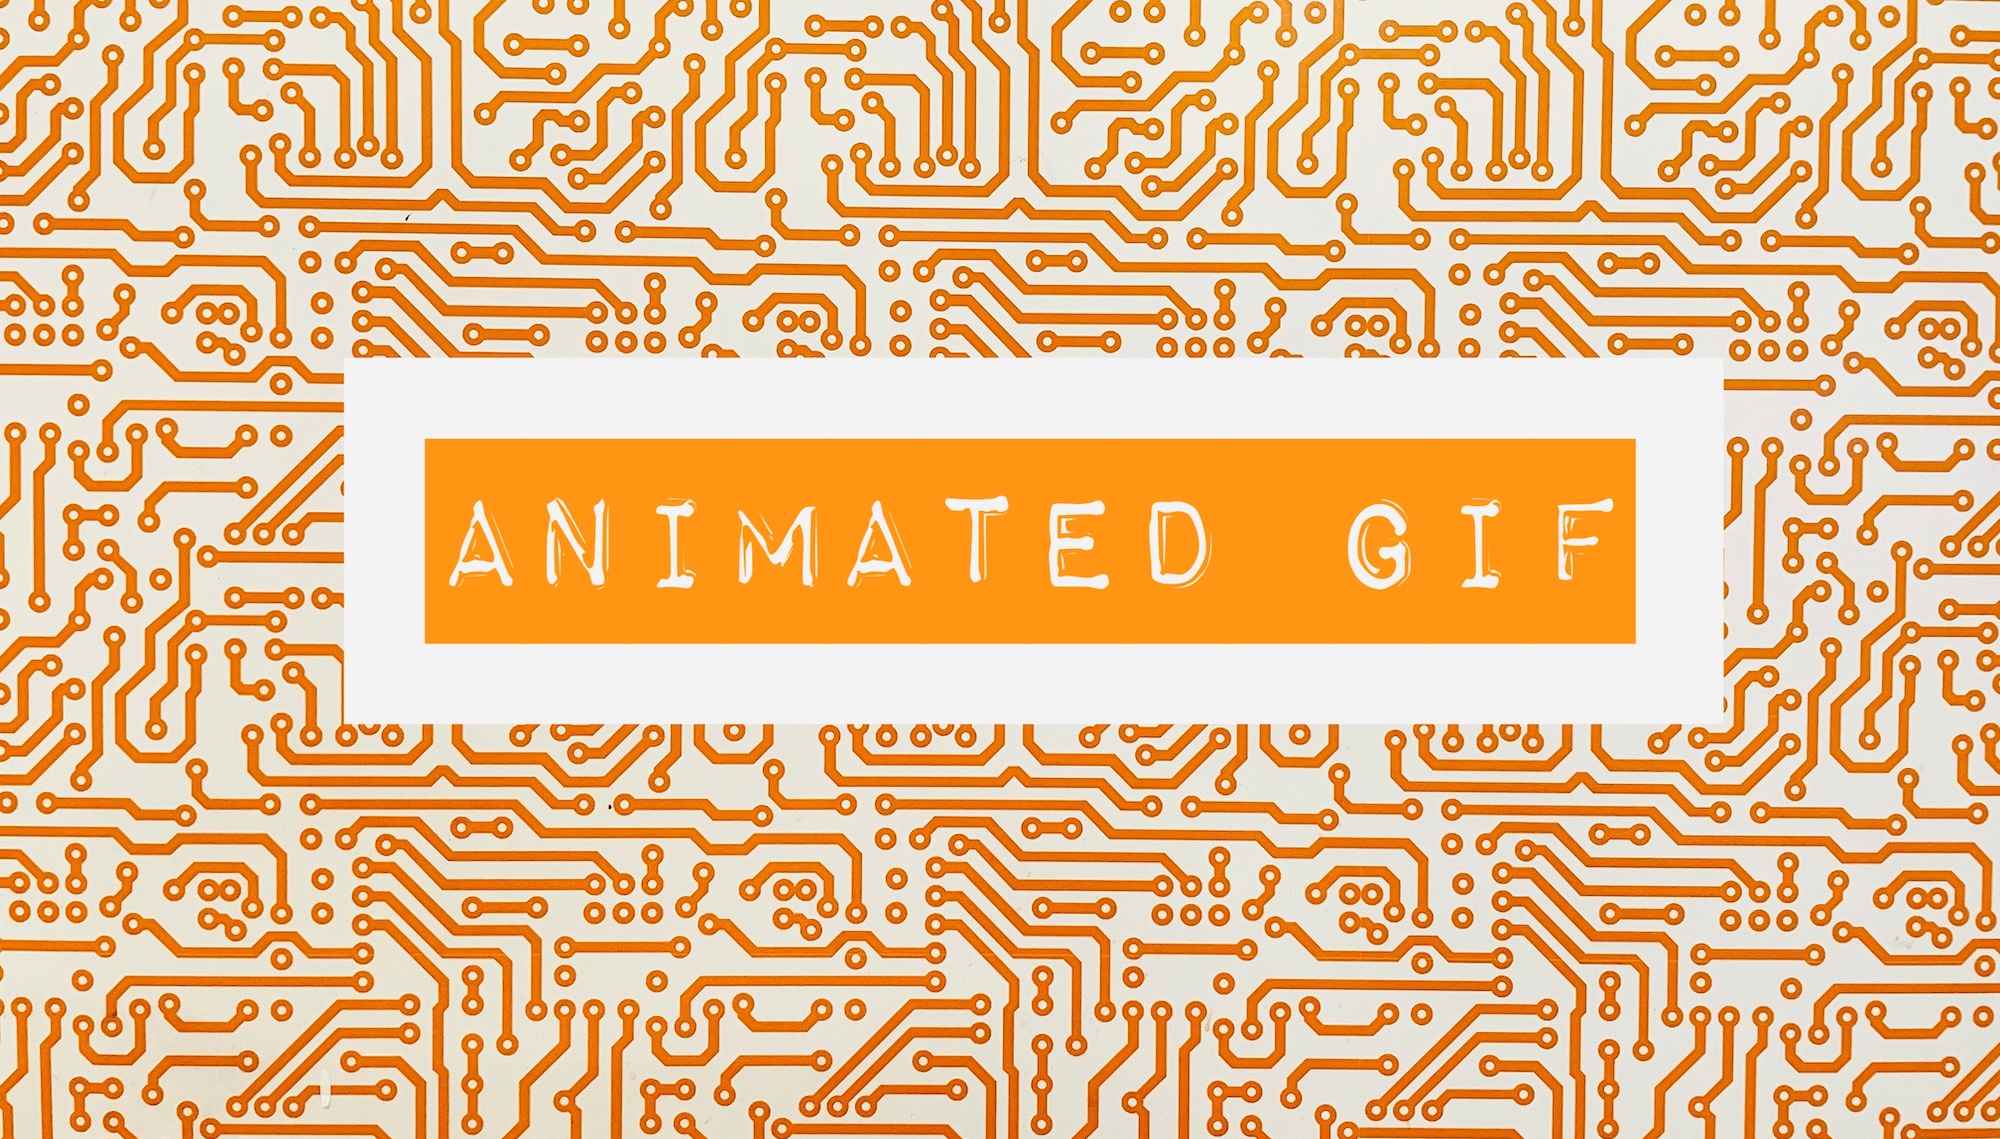 What Is an Animated GIF?